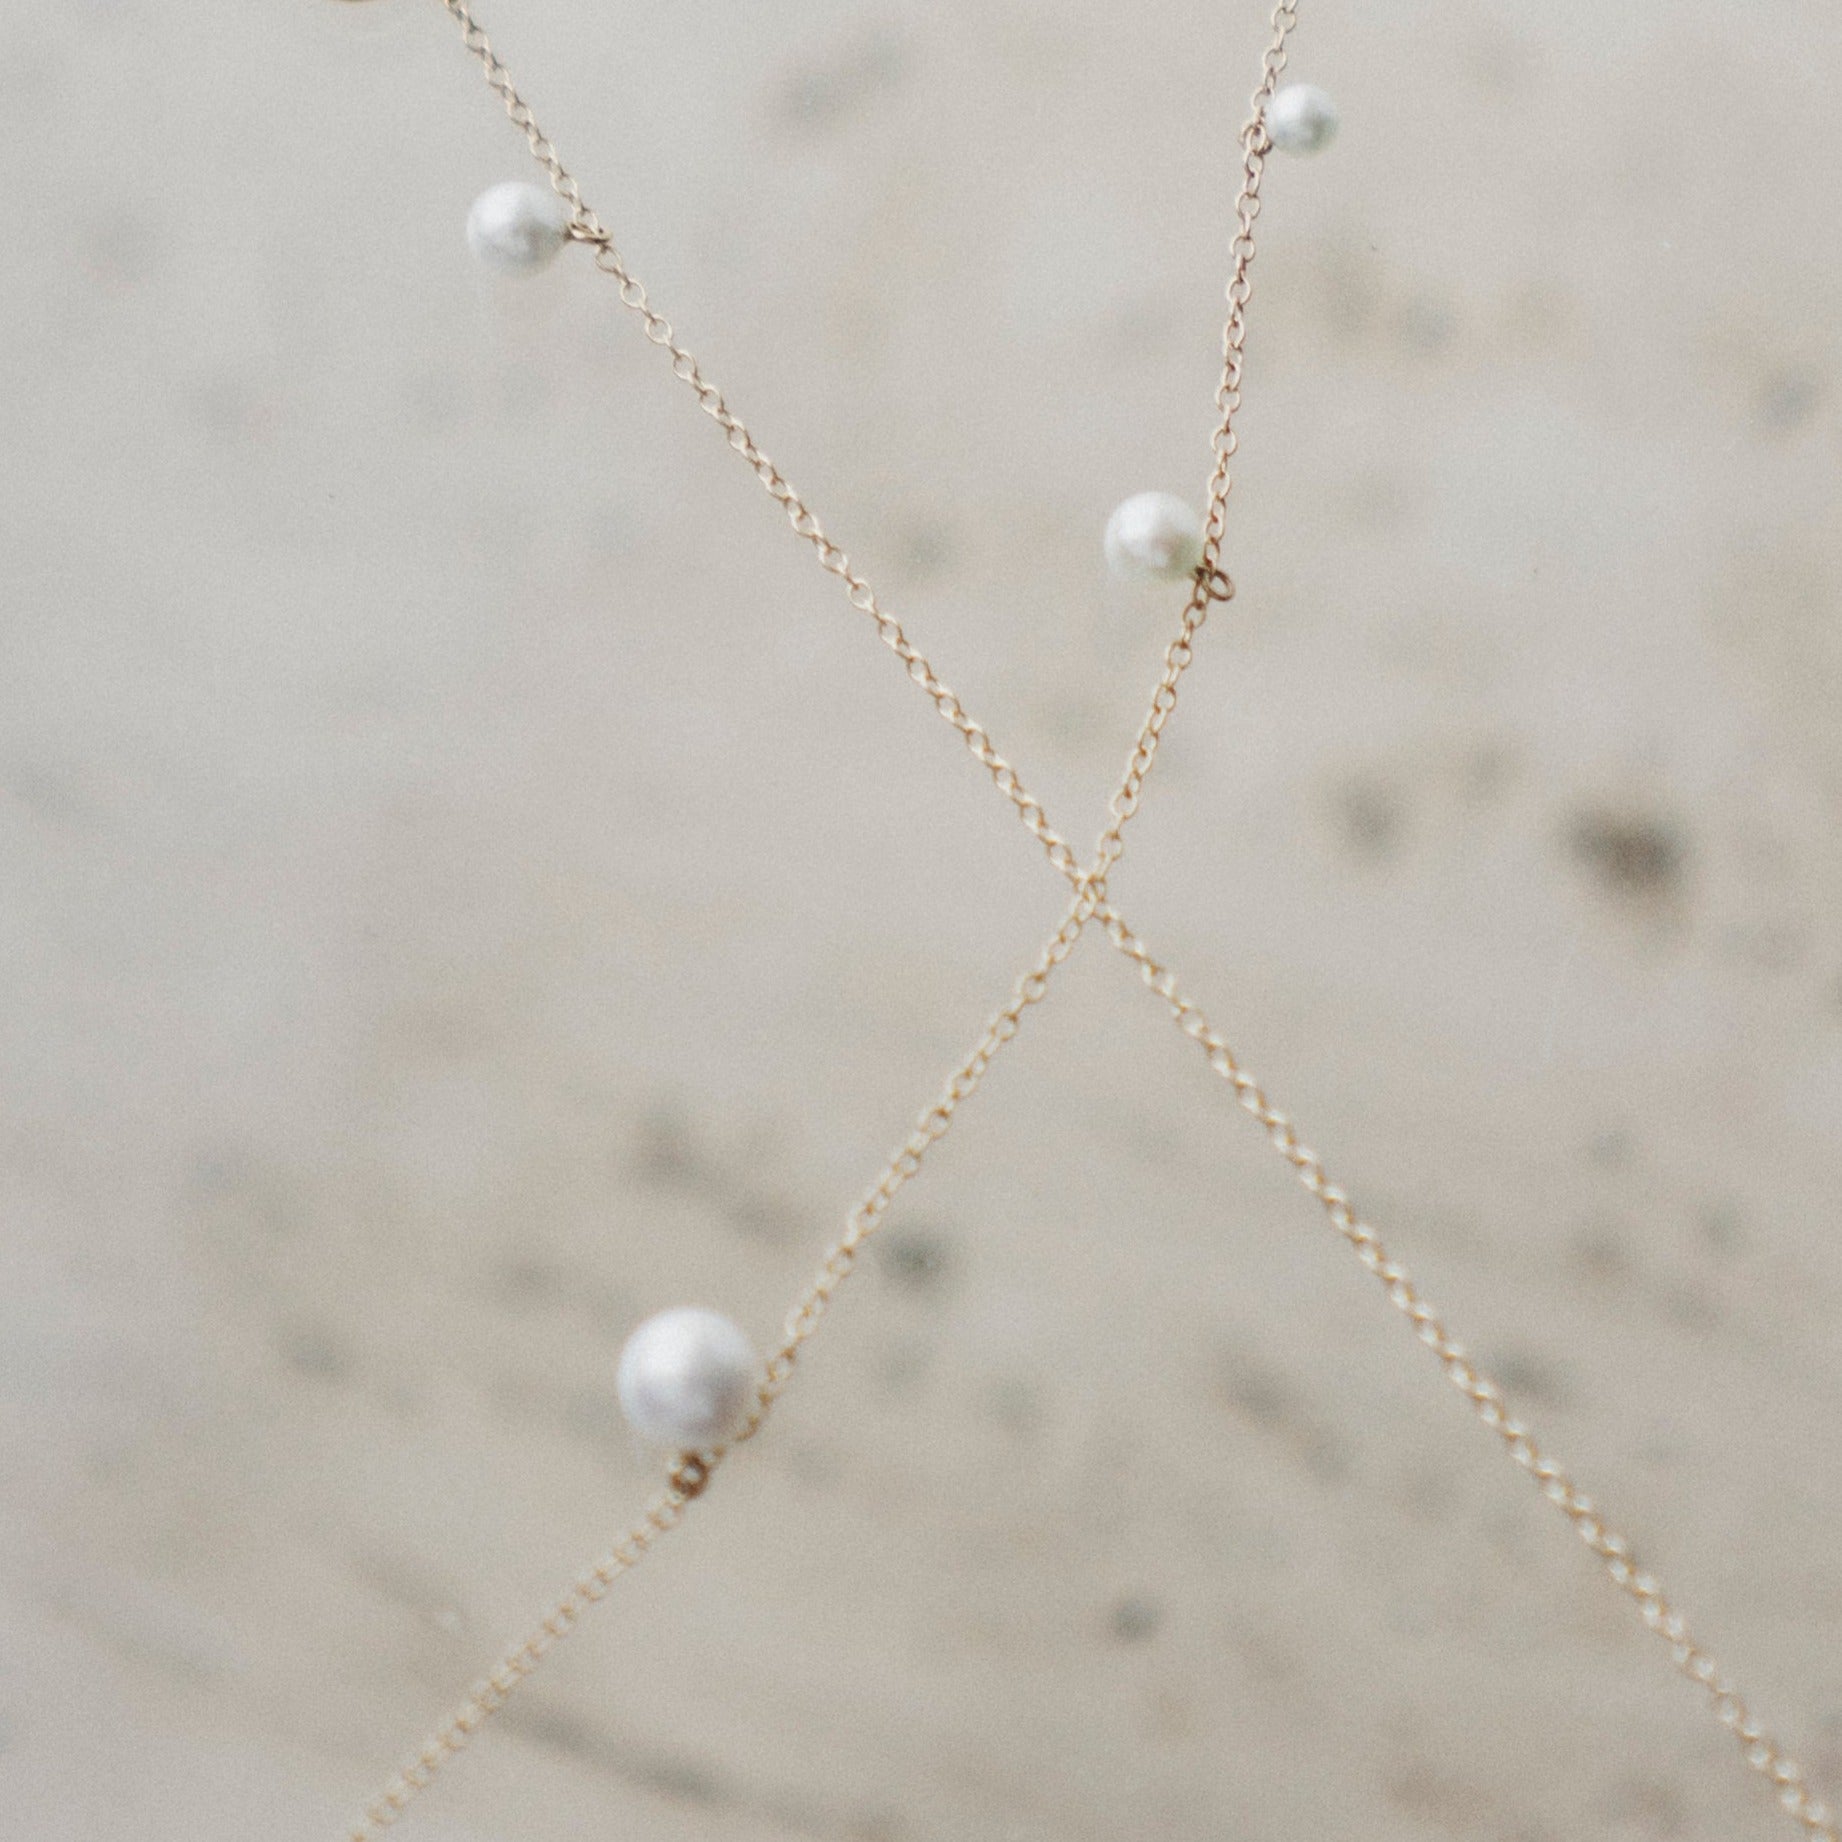 Handmade RIti choker in 14k yellow gold with freshwater pearls made in NYC by SHW fine Jewelry